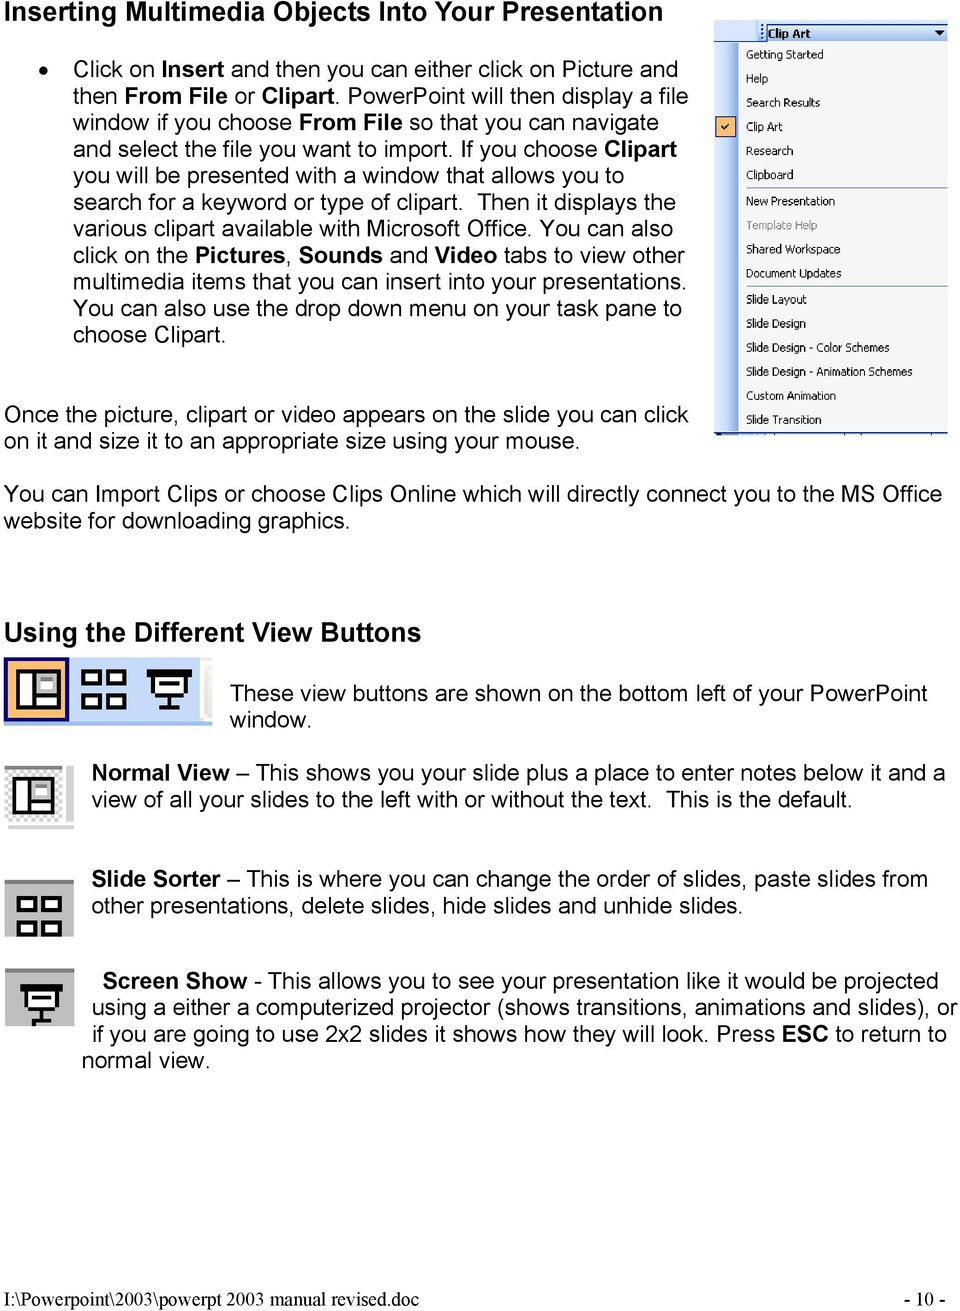 If you choose Clipart you will be presented with a window that allows you to search for a keyword or type of clipart. Then it displays the various clipart available with Microsoft Office.